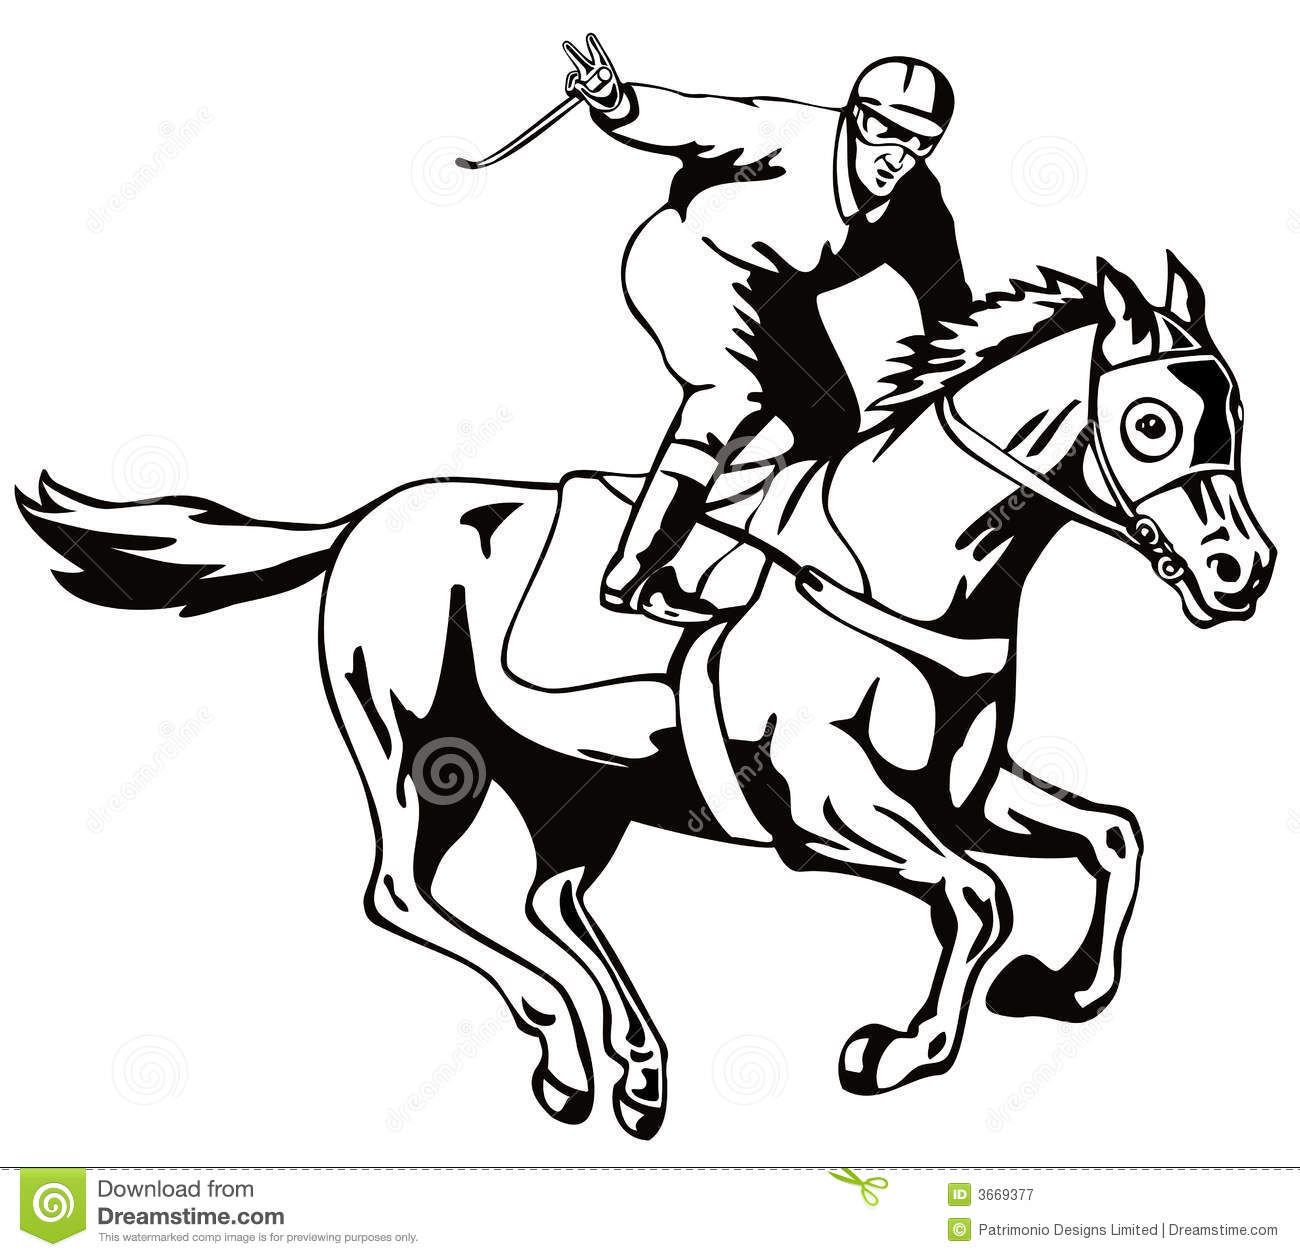 Clipart Of A Black And White Derby Horse Race Jockey Royalty Free Car